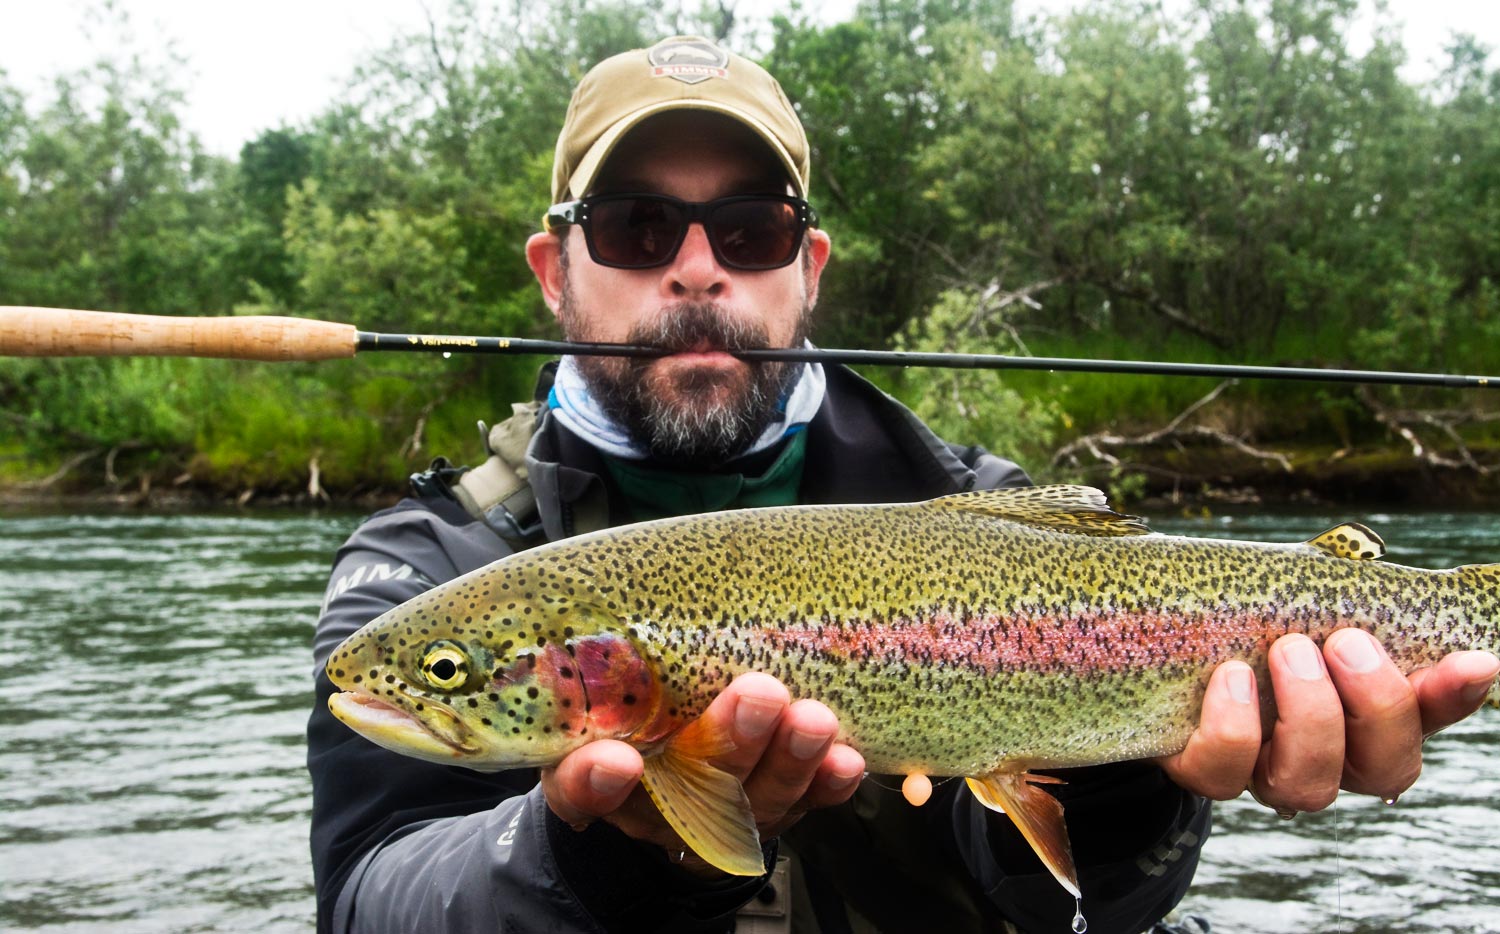 This Is Why I Love Fly Fishing! Coastal Cutthroat Trout with A